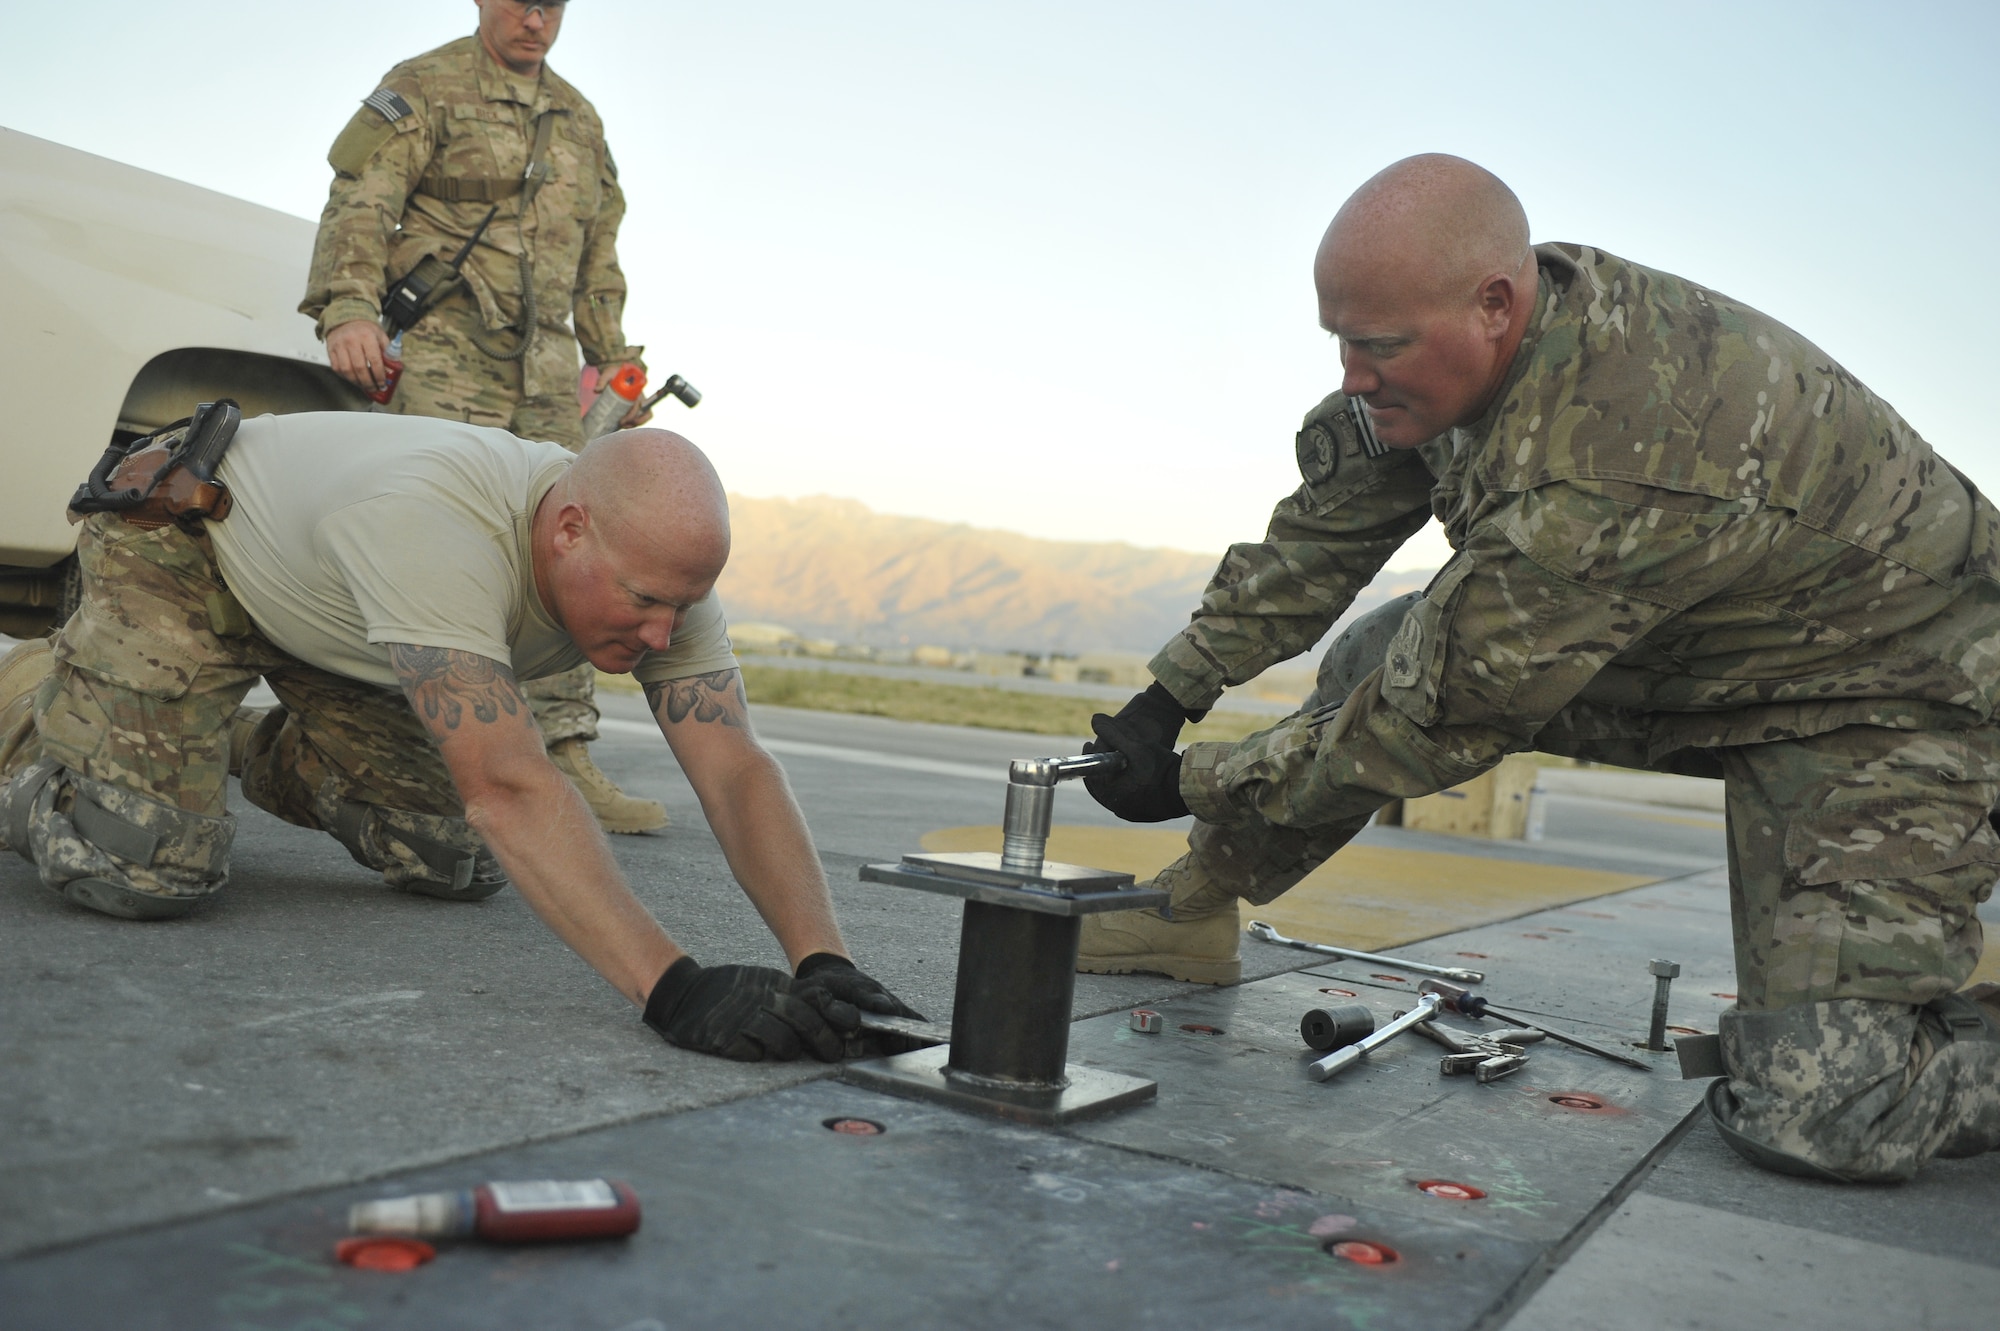 Master Sgt. Joshua Graves (left), 455th Expeditionary Civil Engineer Squadron superintendent, and Master Sgt. Jeremiah Graves, 455th ECES non-commissioned officer in charge of operations, conduct repairs on the main runway at Bagram Airfield, Afghanistan June 9th, 2014. Joshua and Jeremiah, two brothers from Duluth, Minnesota are deployed from the Air National guards' 148th Fighter Wing, Duluth, Minnesota. (U.S. Air Force photo by Airman 1st Class Bobby Cummings/Released)